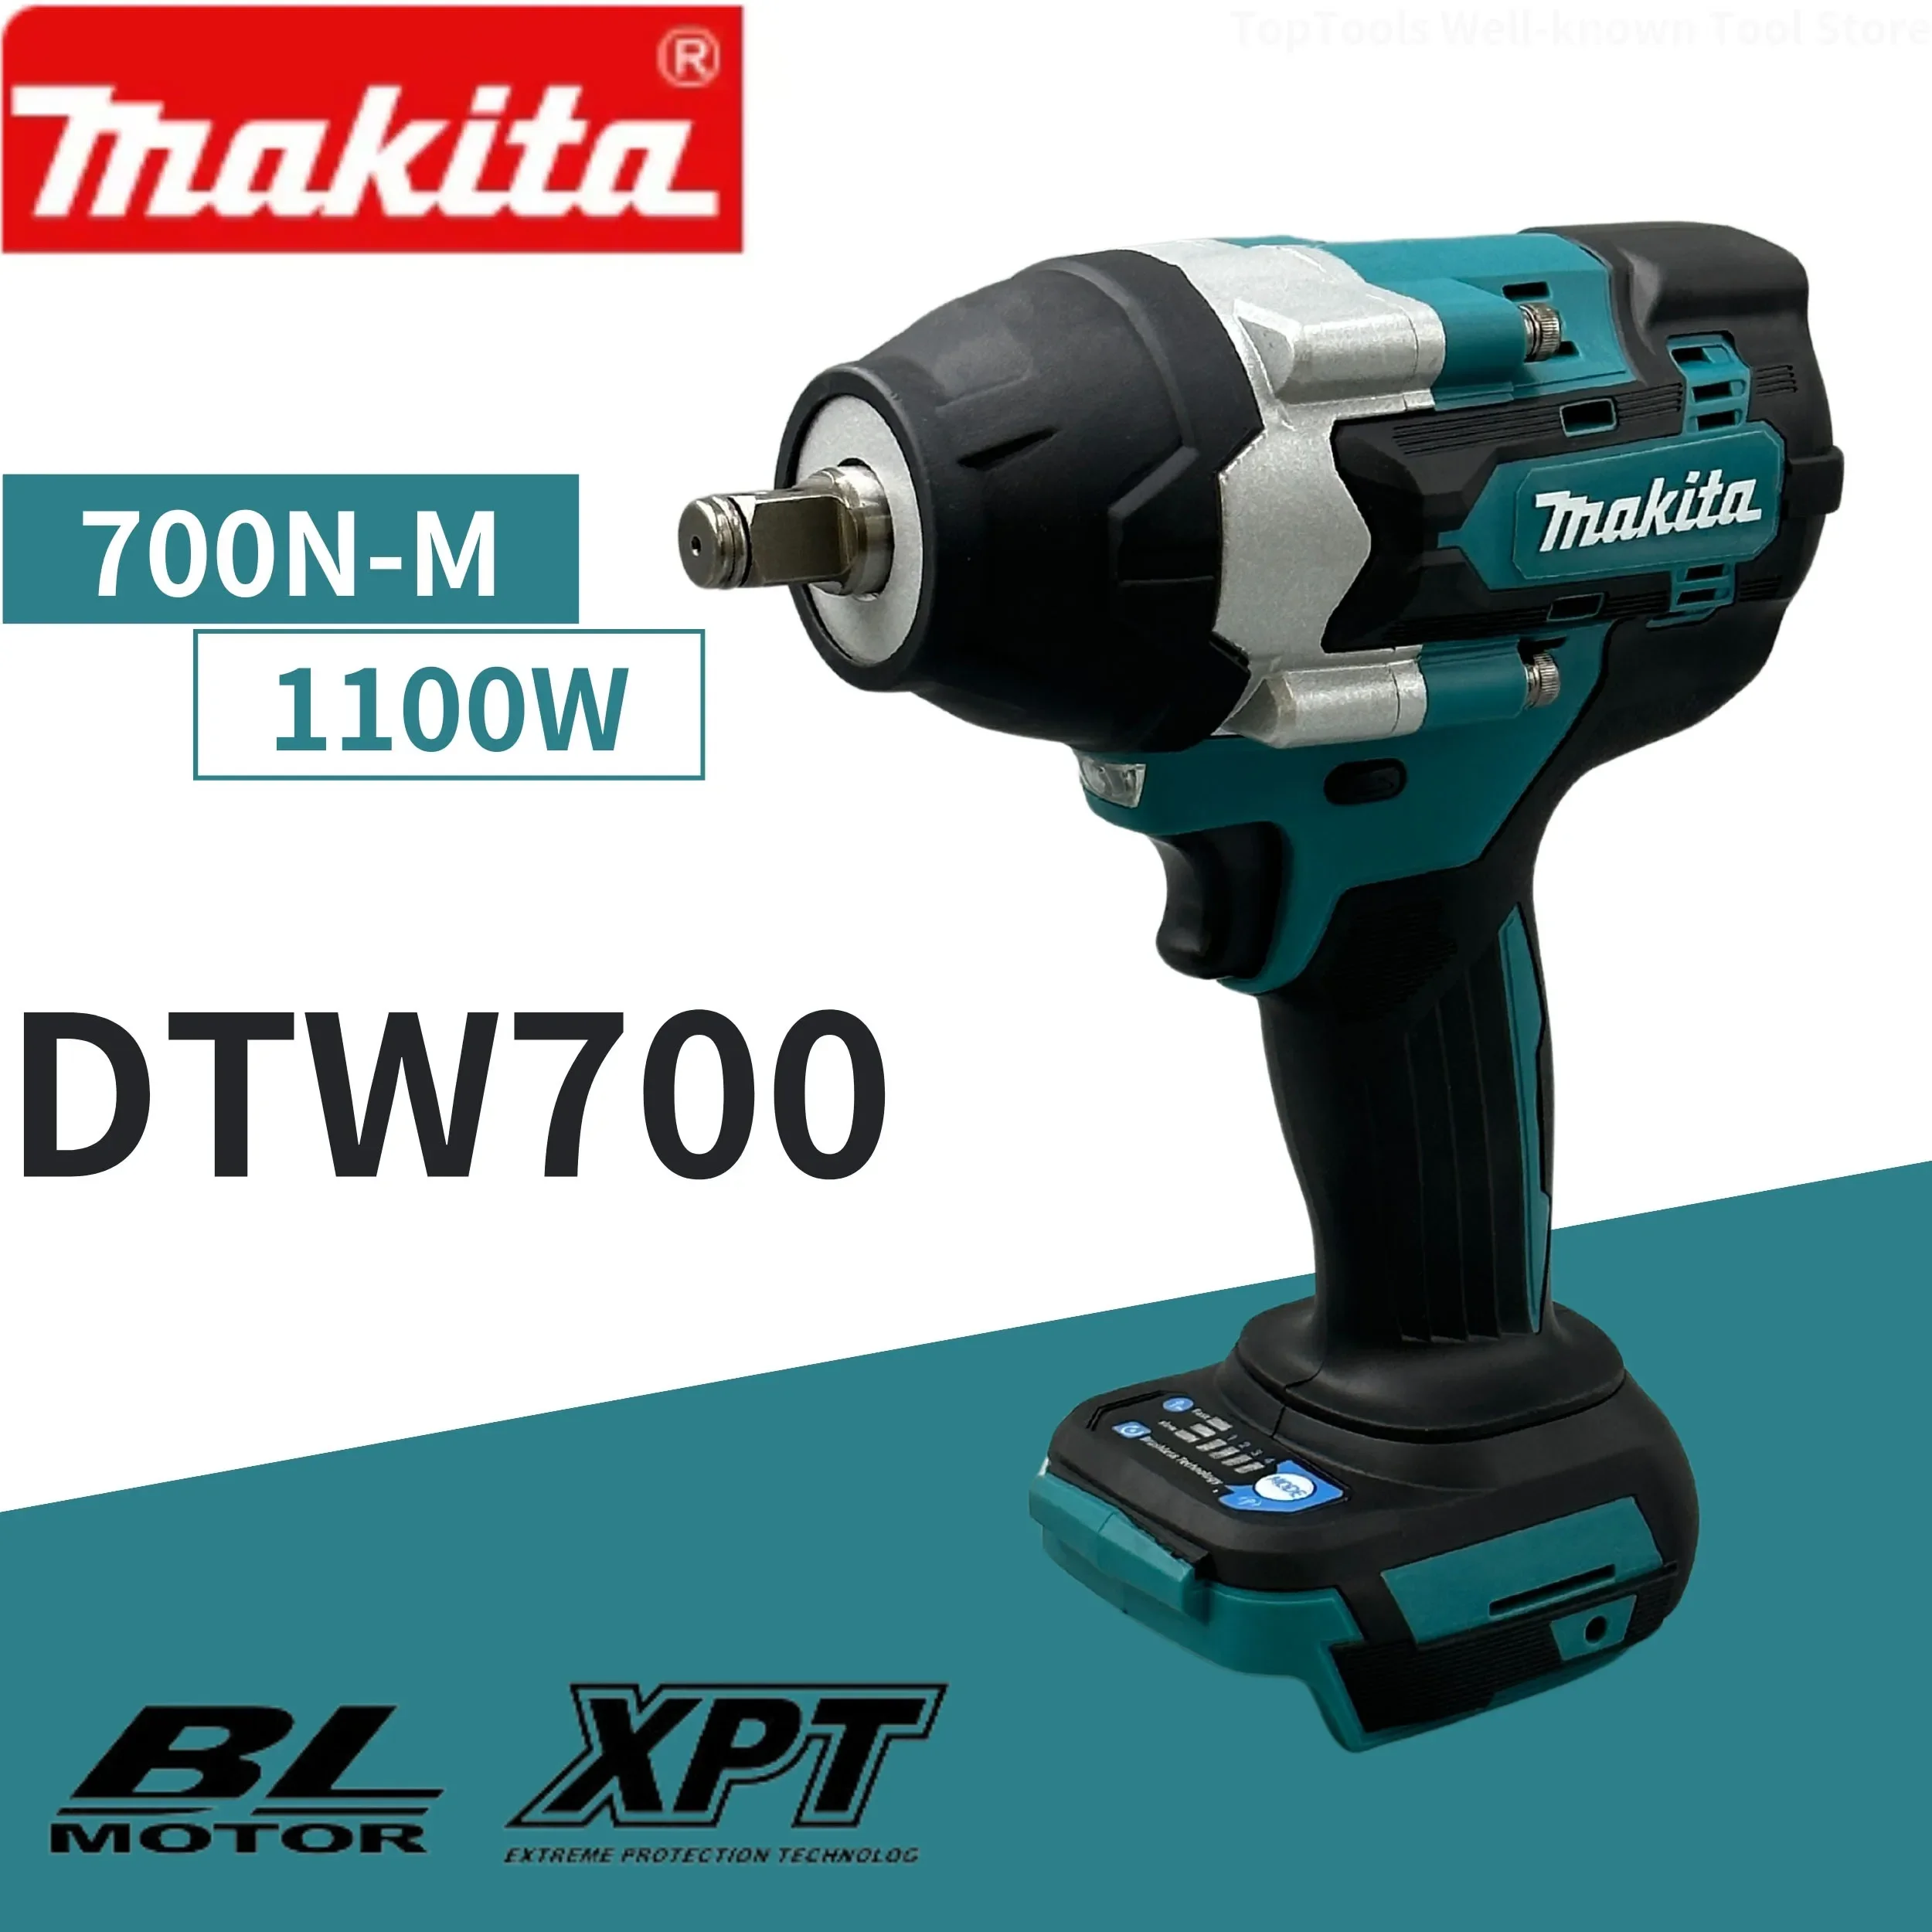 

Makita DTW700 18V Brushless Impact Wrench Bare Unit 1/2" Square Drive Cordless Lithium Ion Tool Repair, Screwdrive